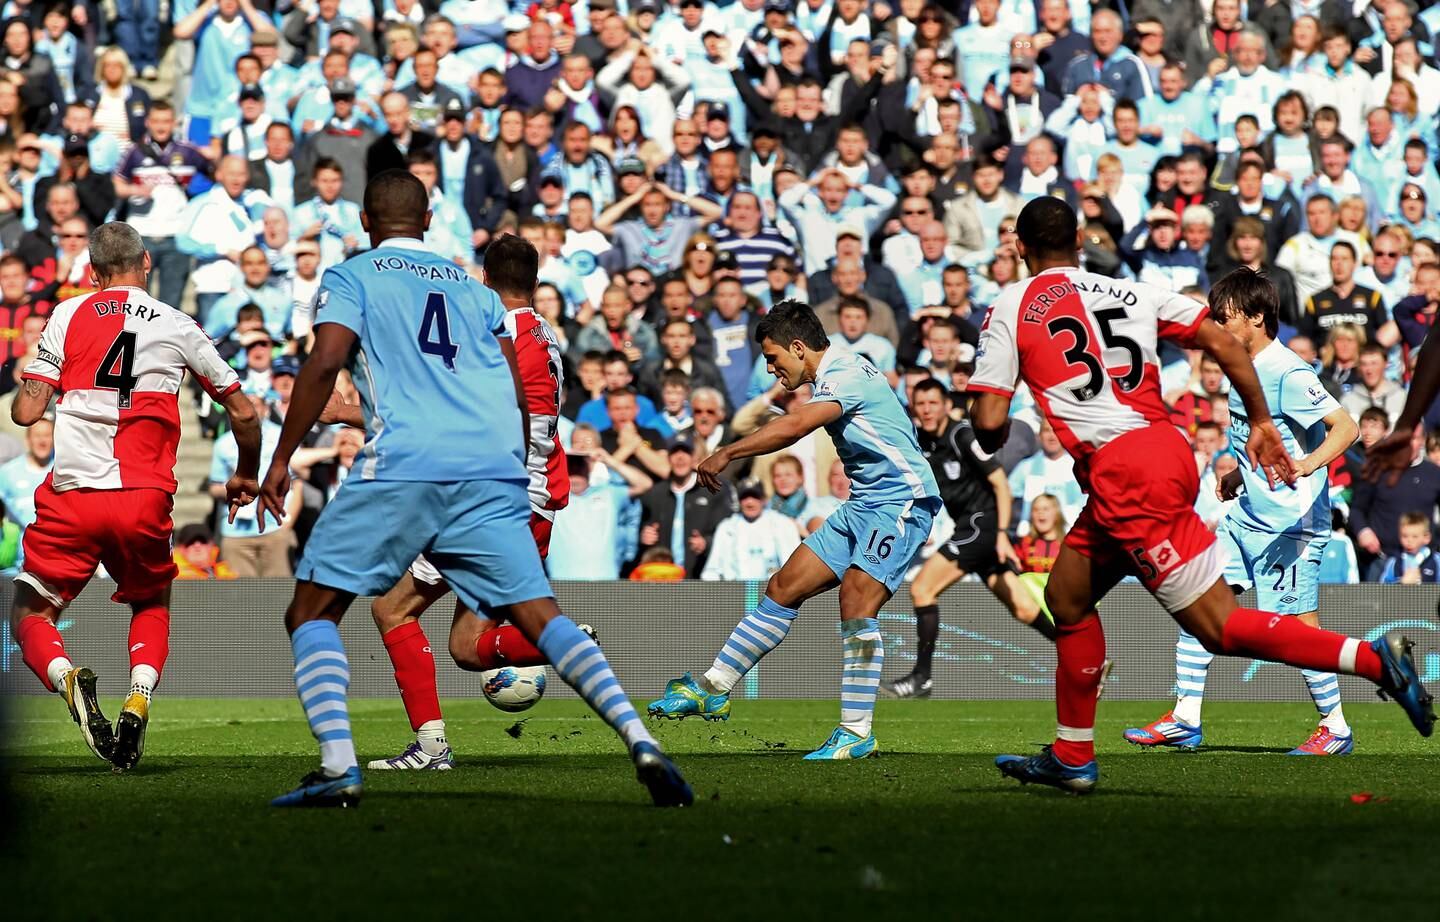 Sergio Aguero scores the famous title-winning goal for Manchester City against Queens Park Rangers in 2012. Getty